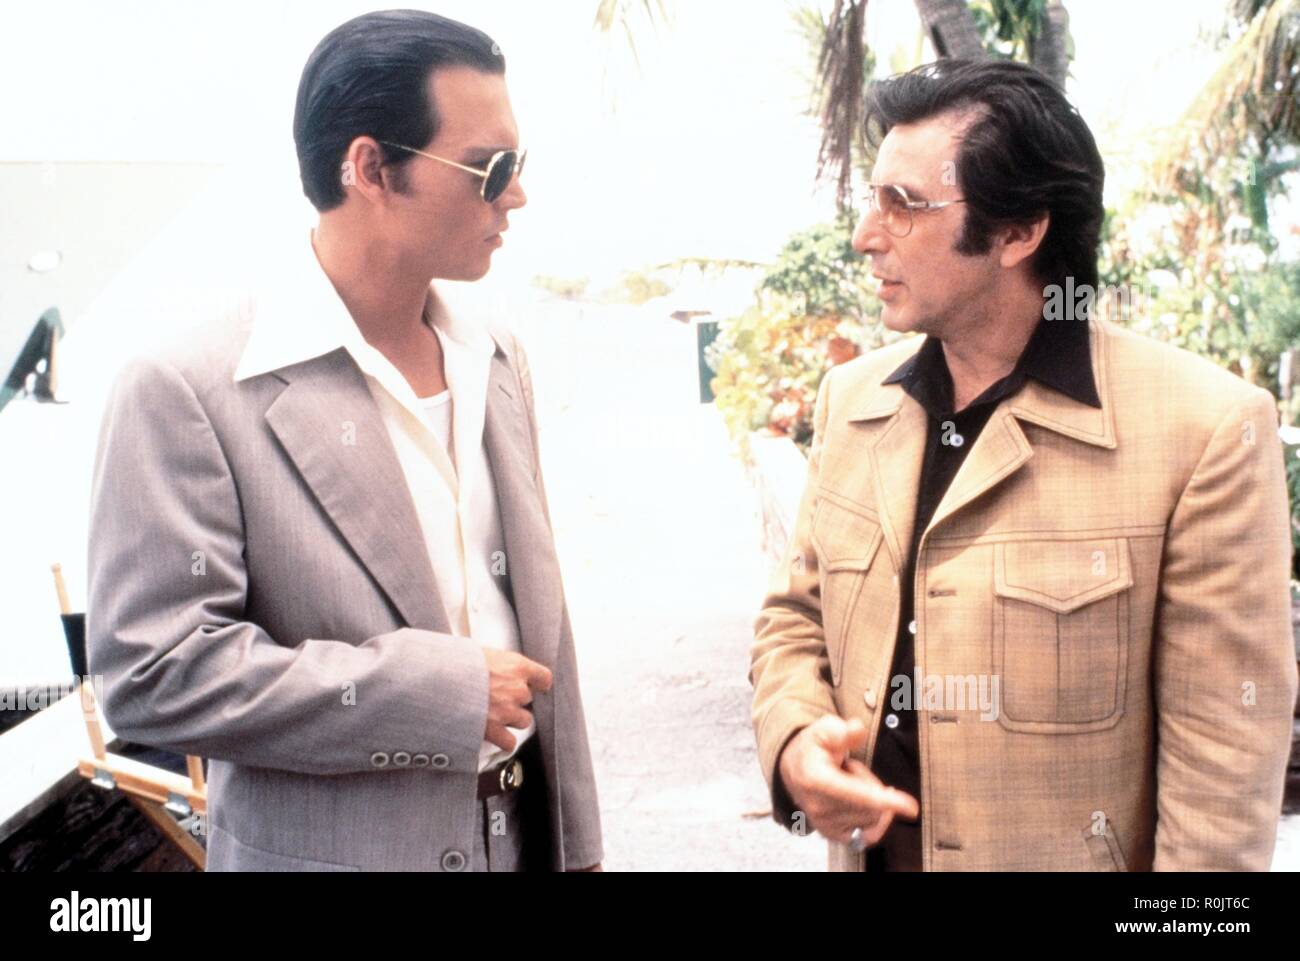 Original film title: DONNIE BRASCO. English title: DONNIE BRASCO. Year: 1997. Director: MIKE NEWELL. Stars: AL PACINO; JOHNNY DEPP. Credit: TRI STAR PICTURES / Album Stock Photo